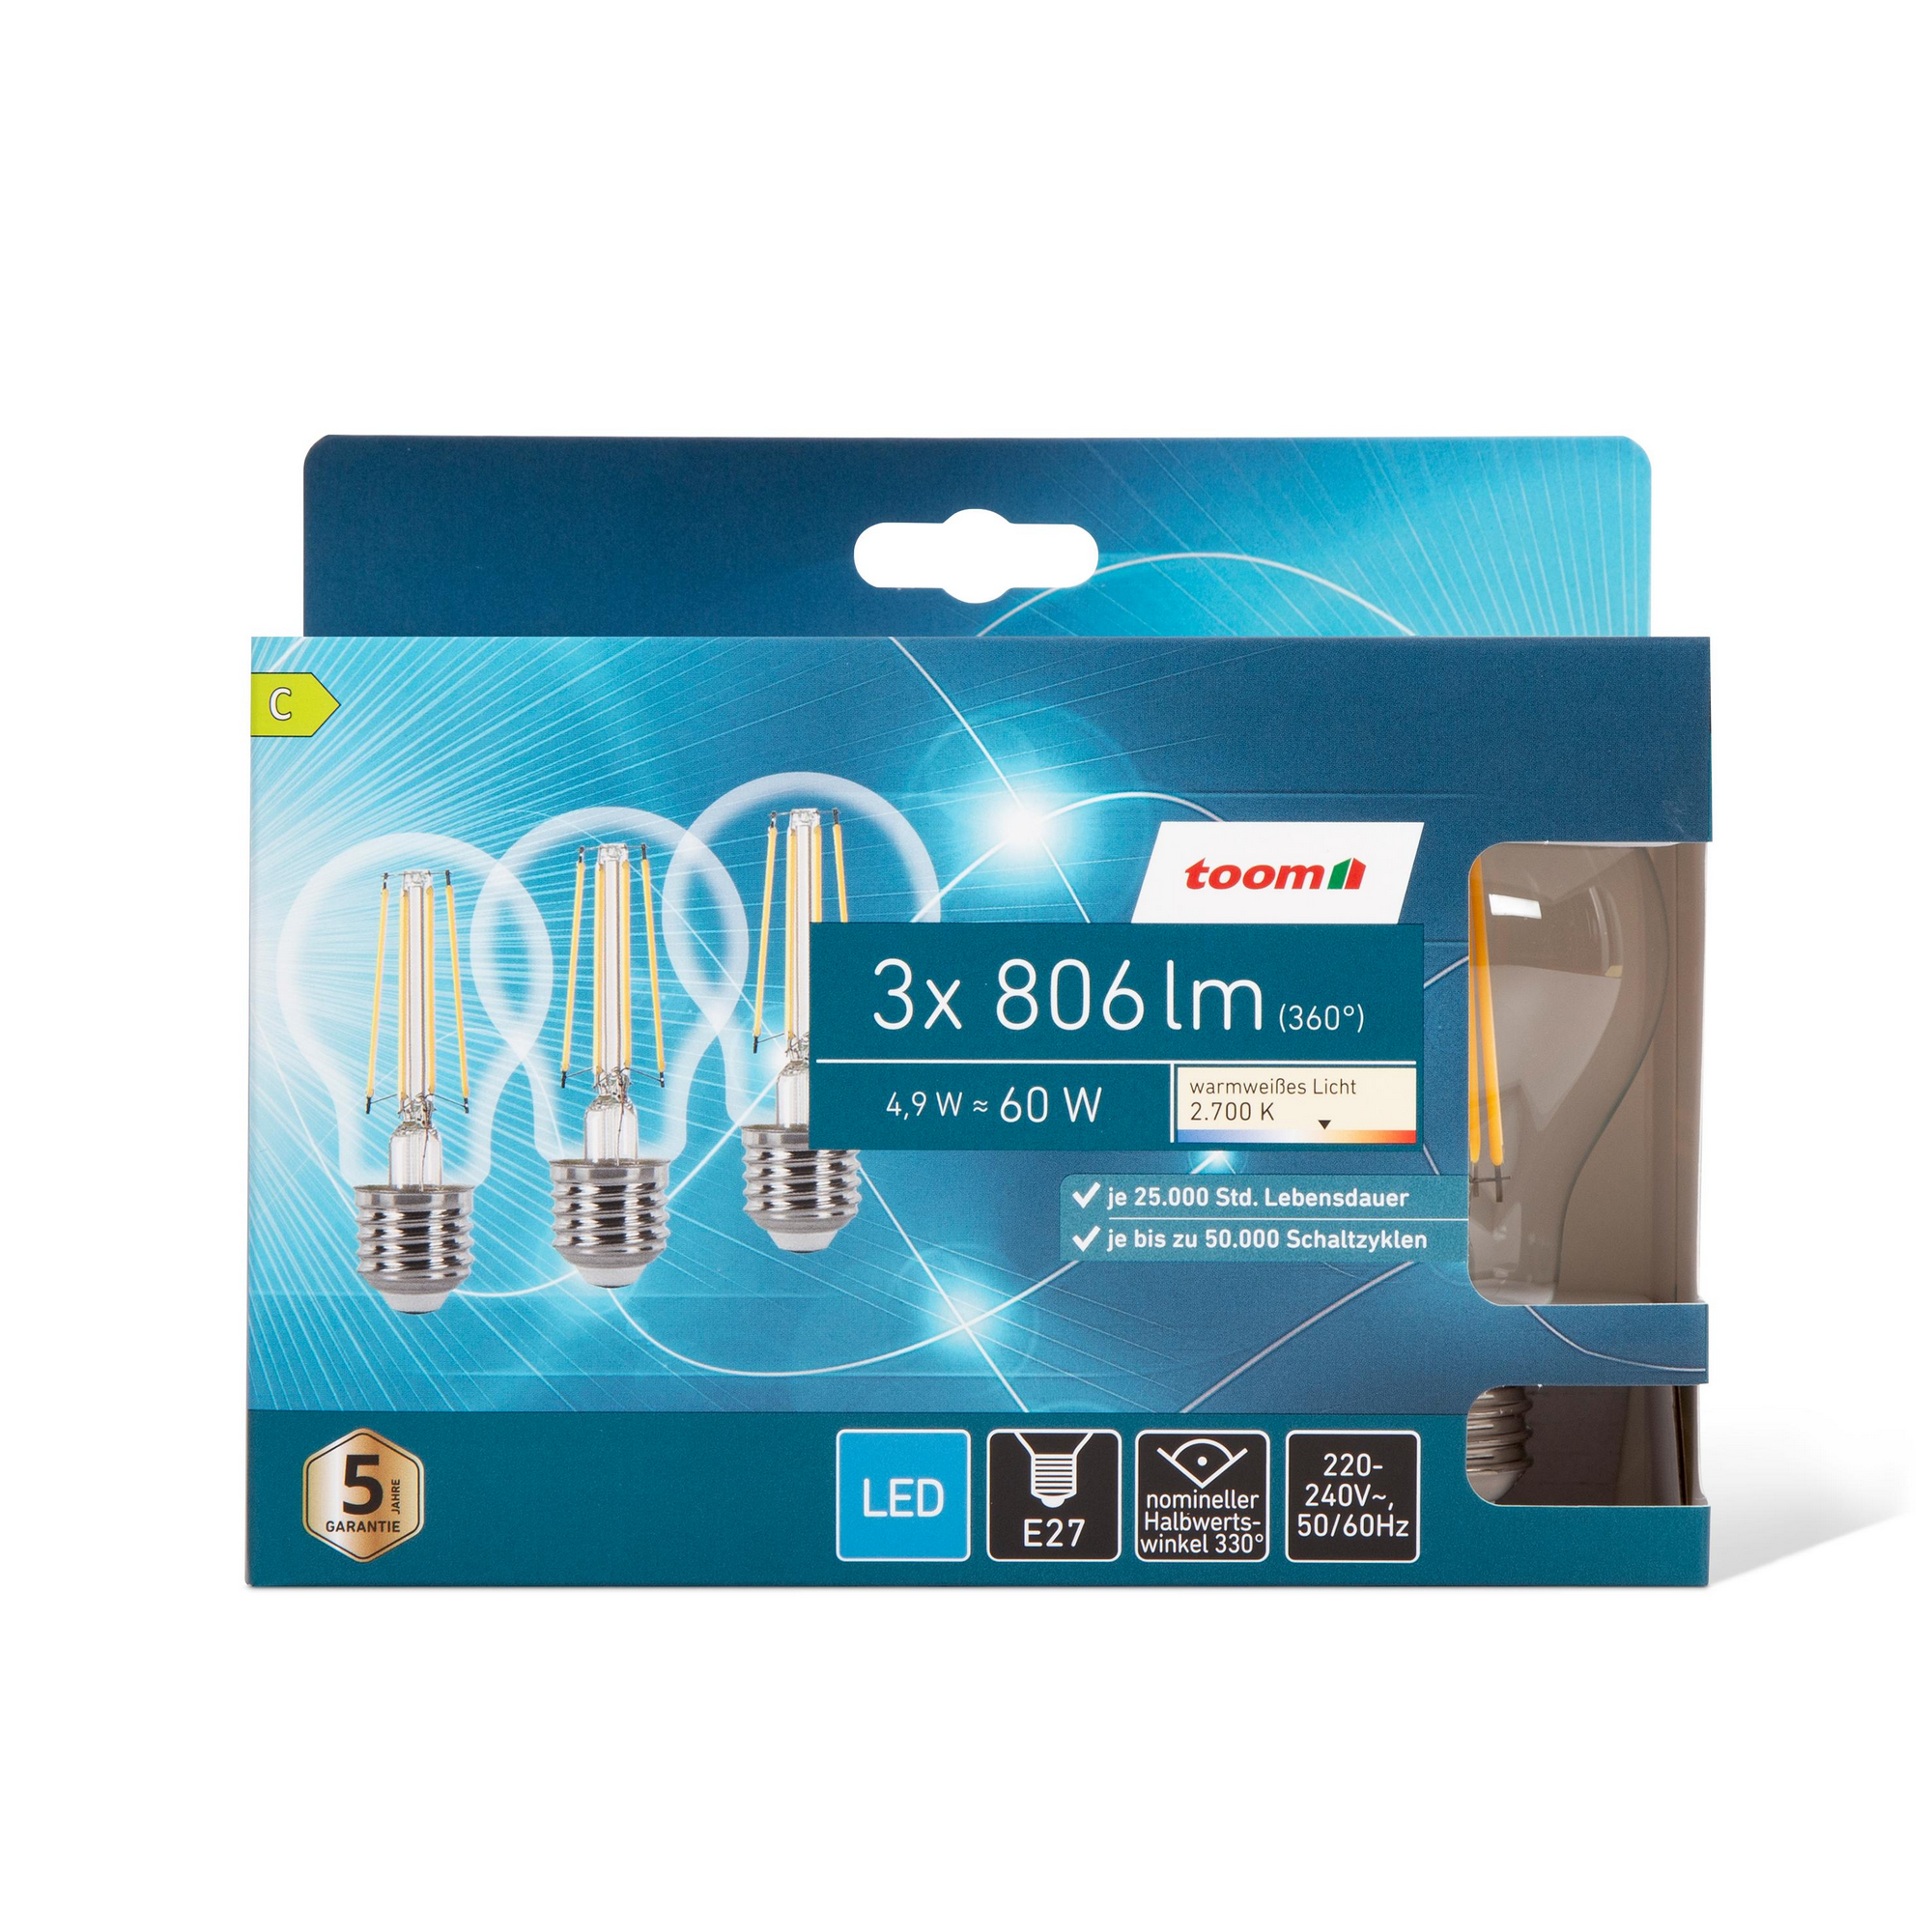 LED-Tropfenlampe klar warmweiß E27 60 W 806 lm, 3er-Pack + product picture